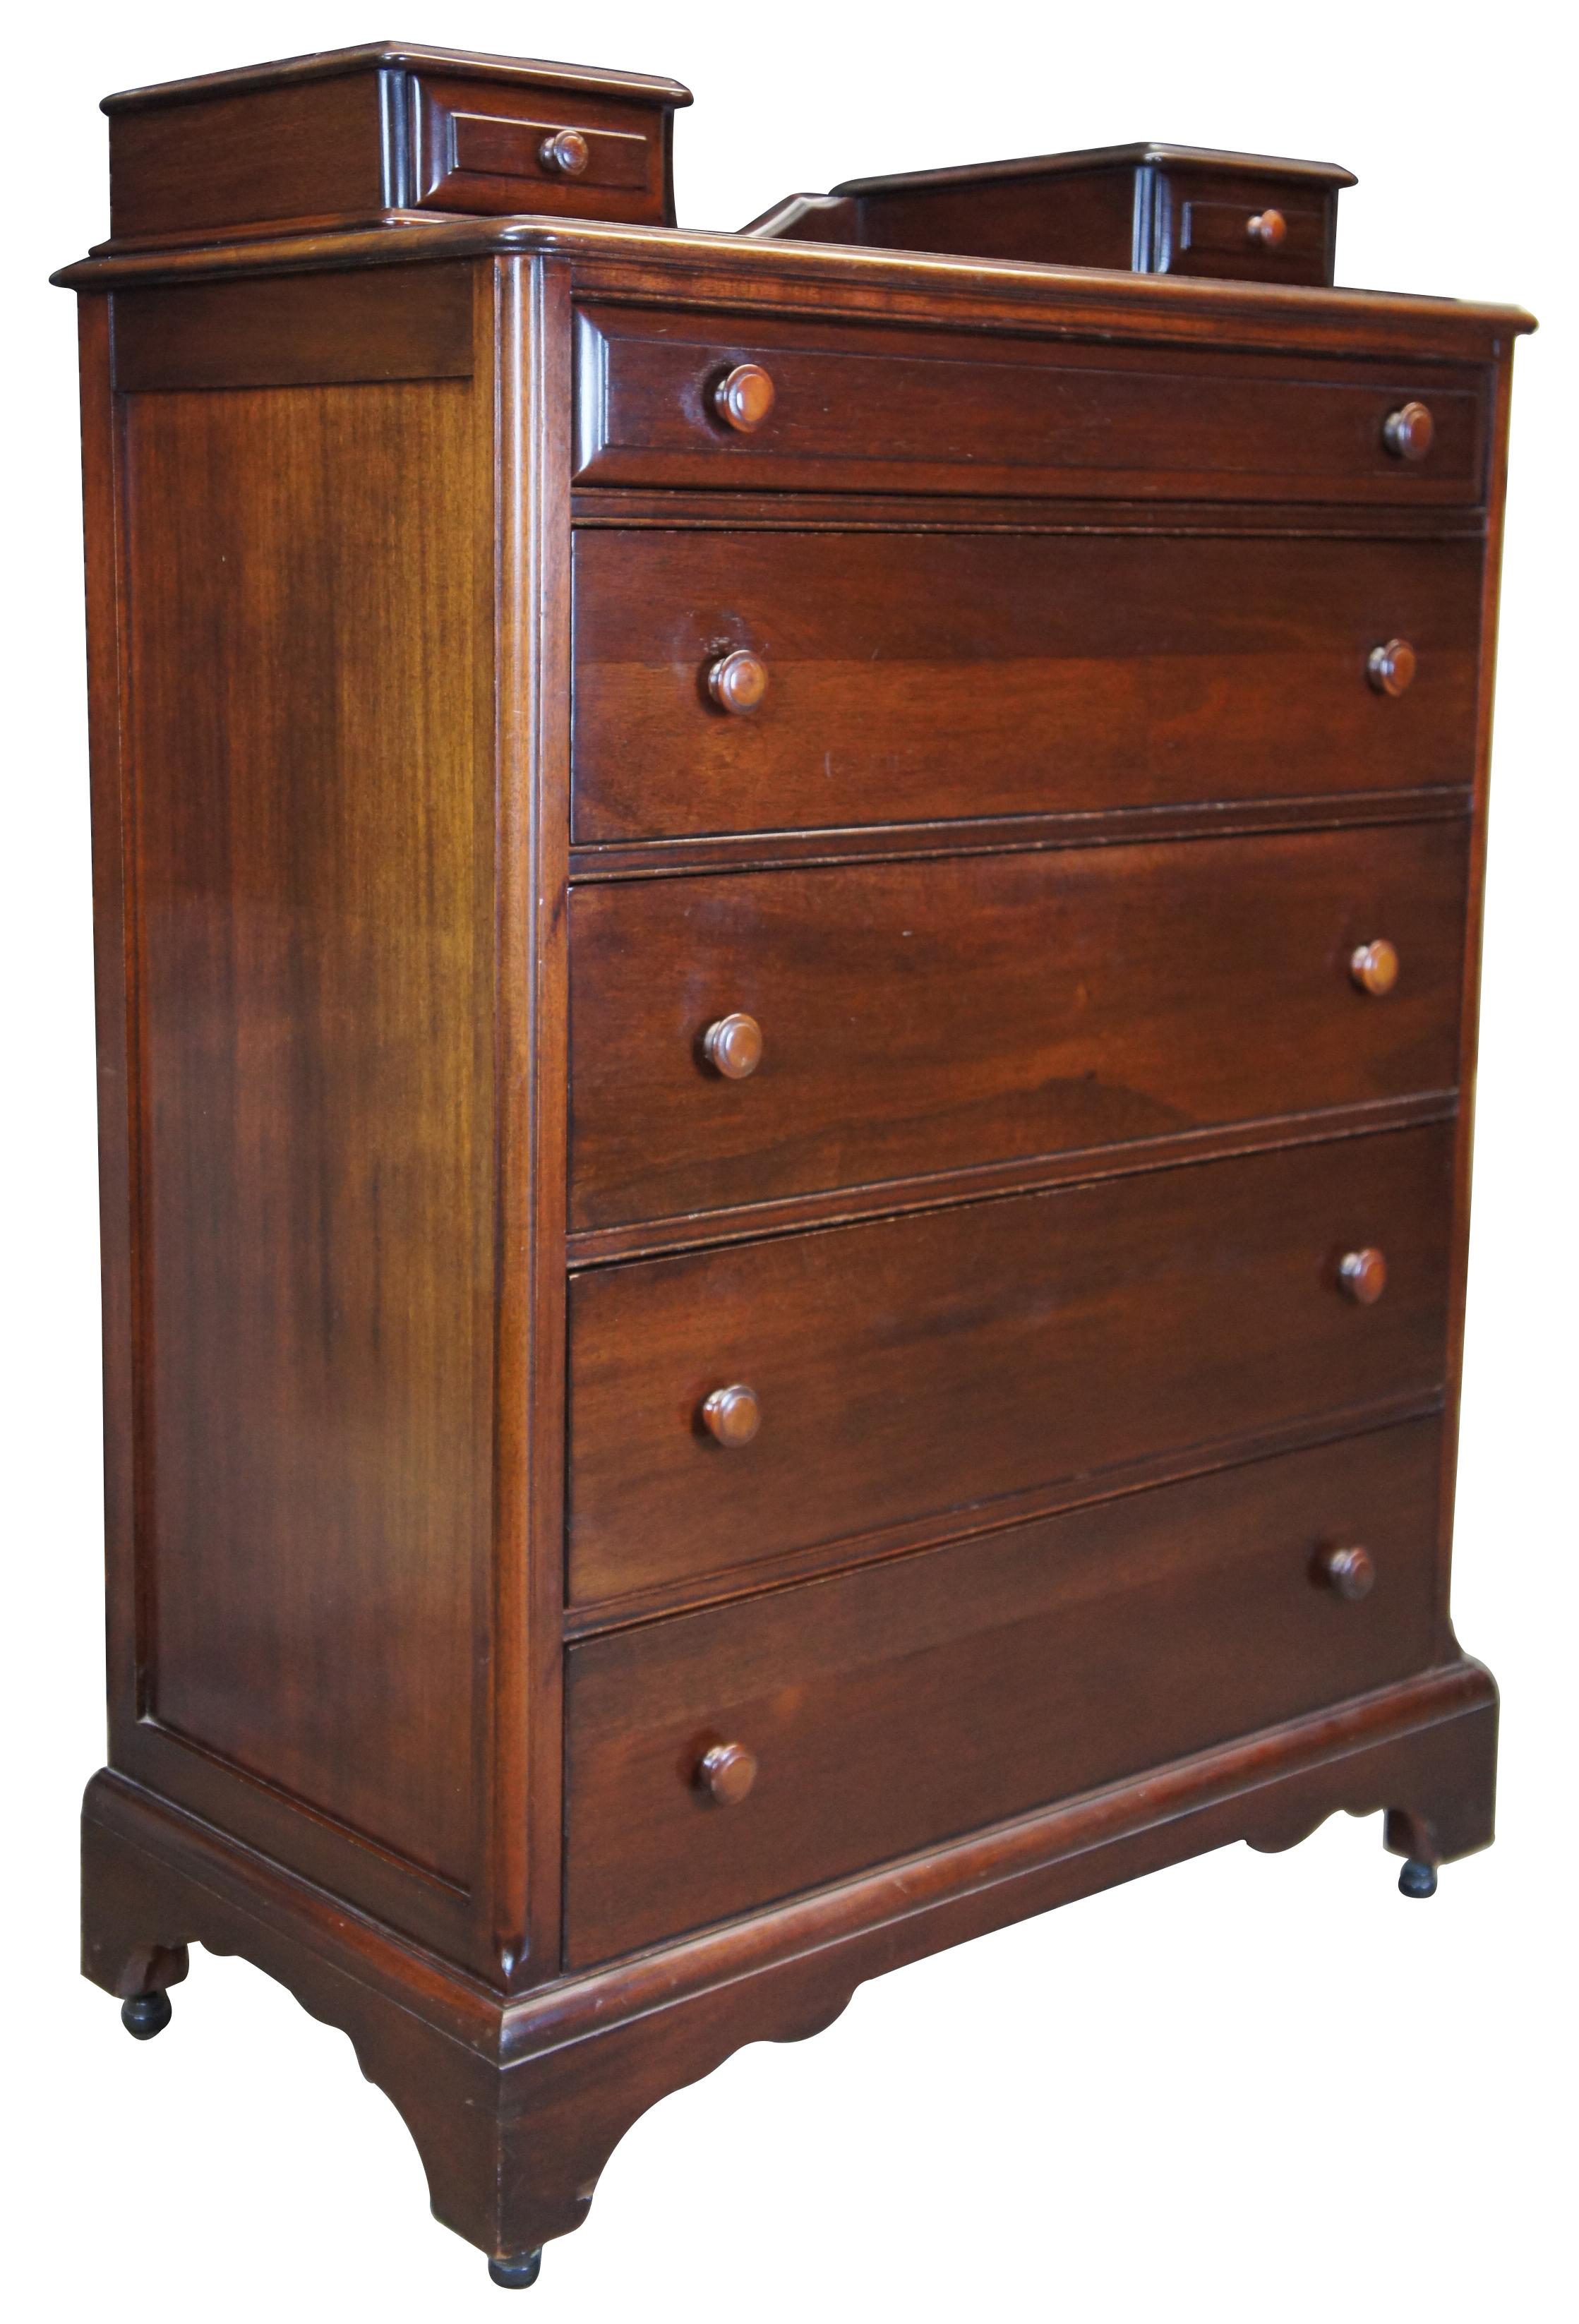 Tallboy dresser, circa 1940s. Made from mahogany in early American styling with six drawers in addition to two upper glove box drawers. Features castors for ease of movement.
  